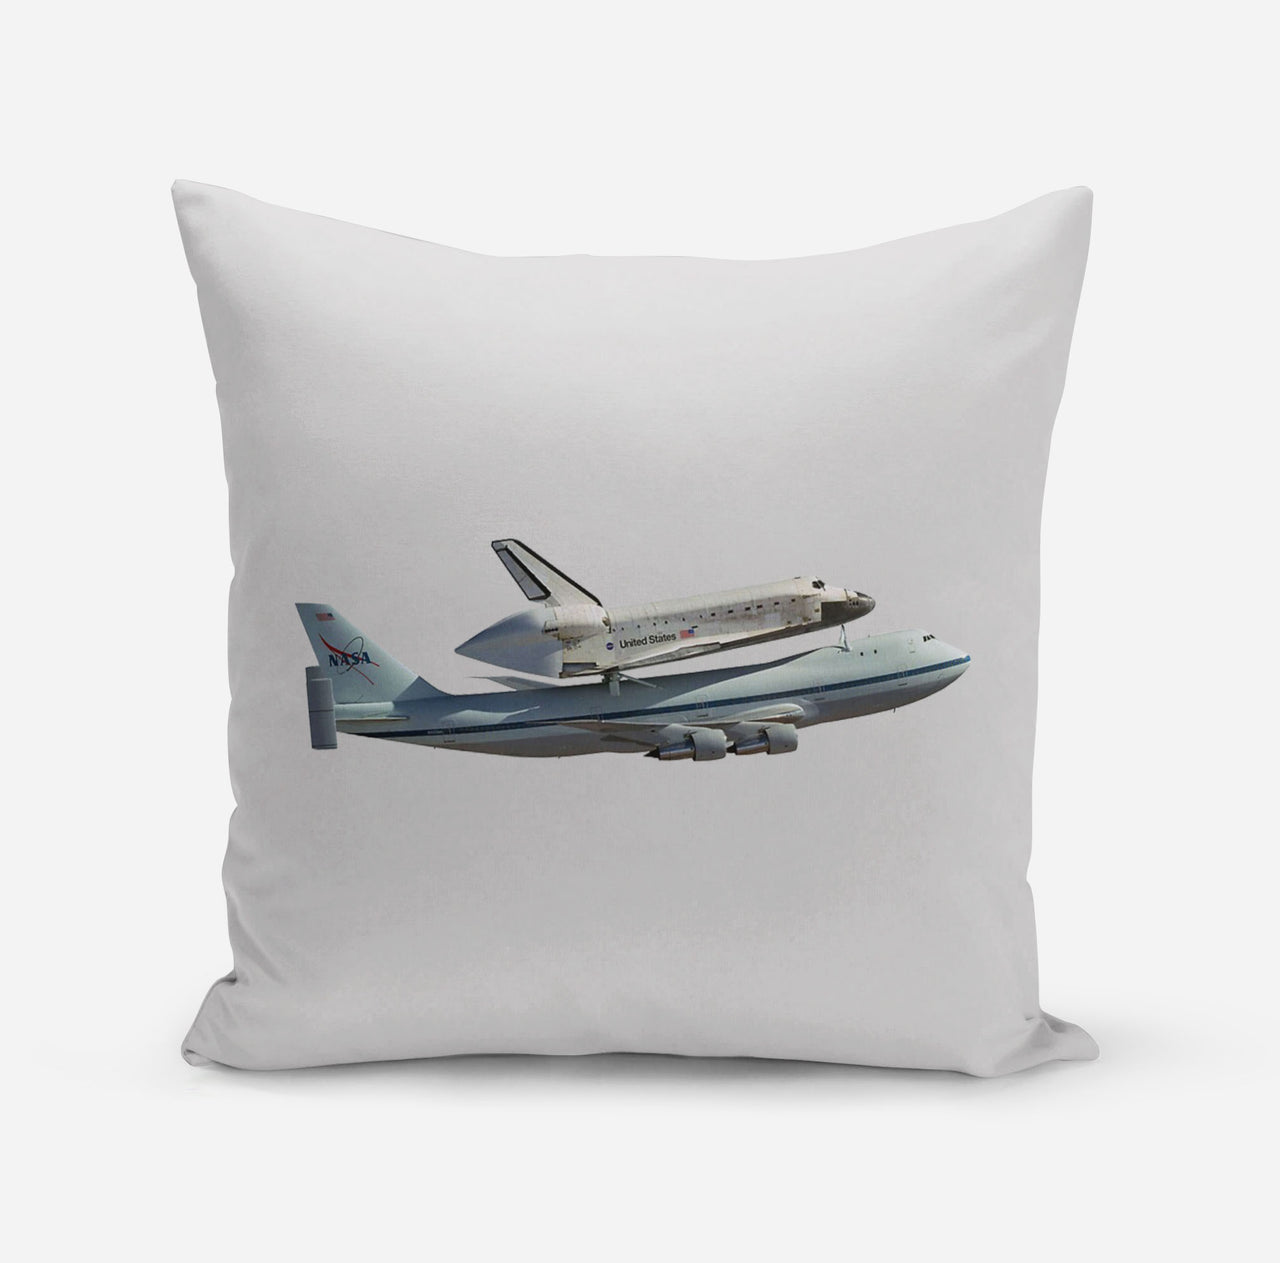 Space shuttle on 747 Designed Pillows